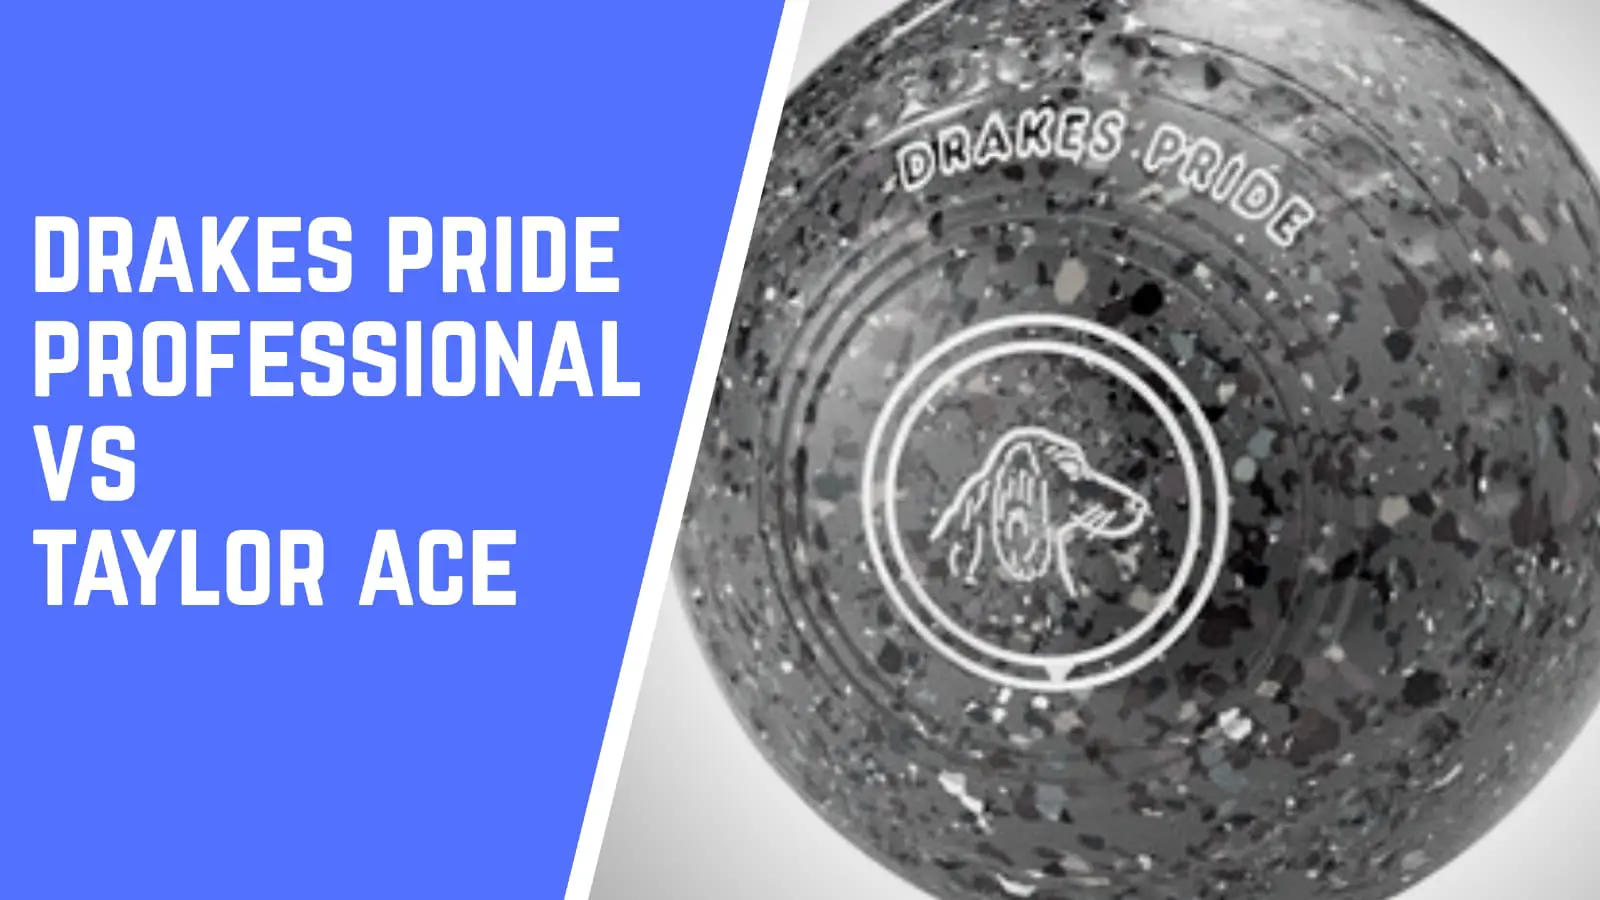 Drakes Pride Professional vs Taylor Ace - Which to choose?